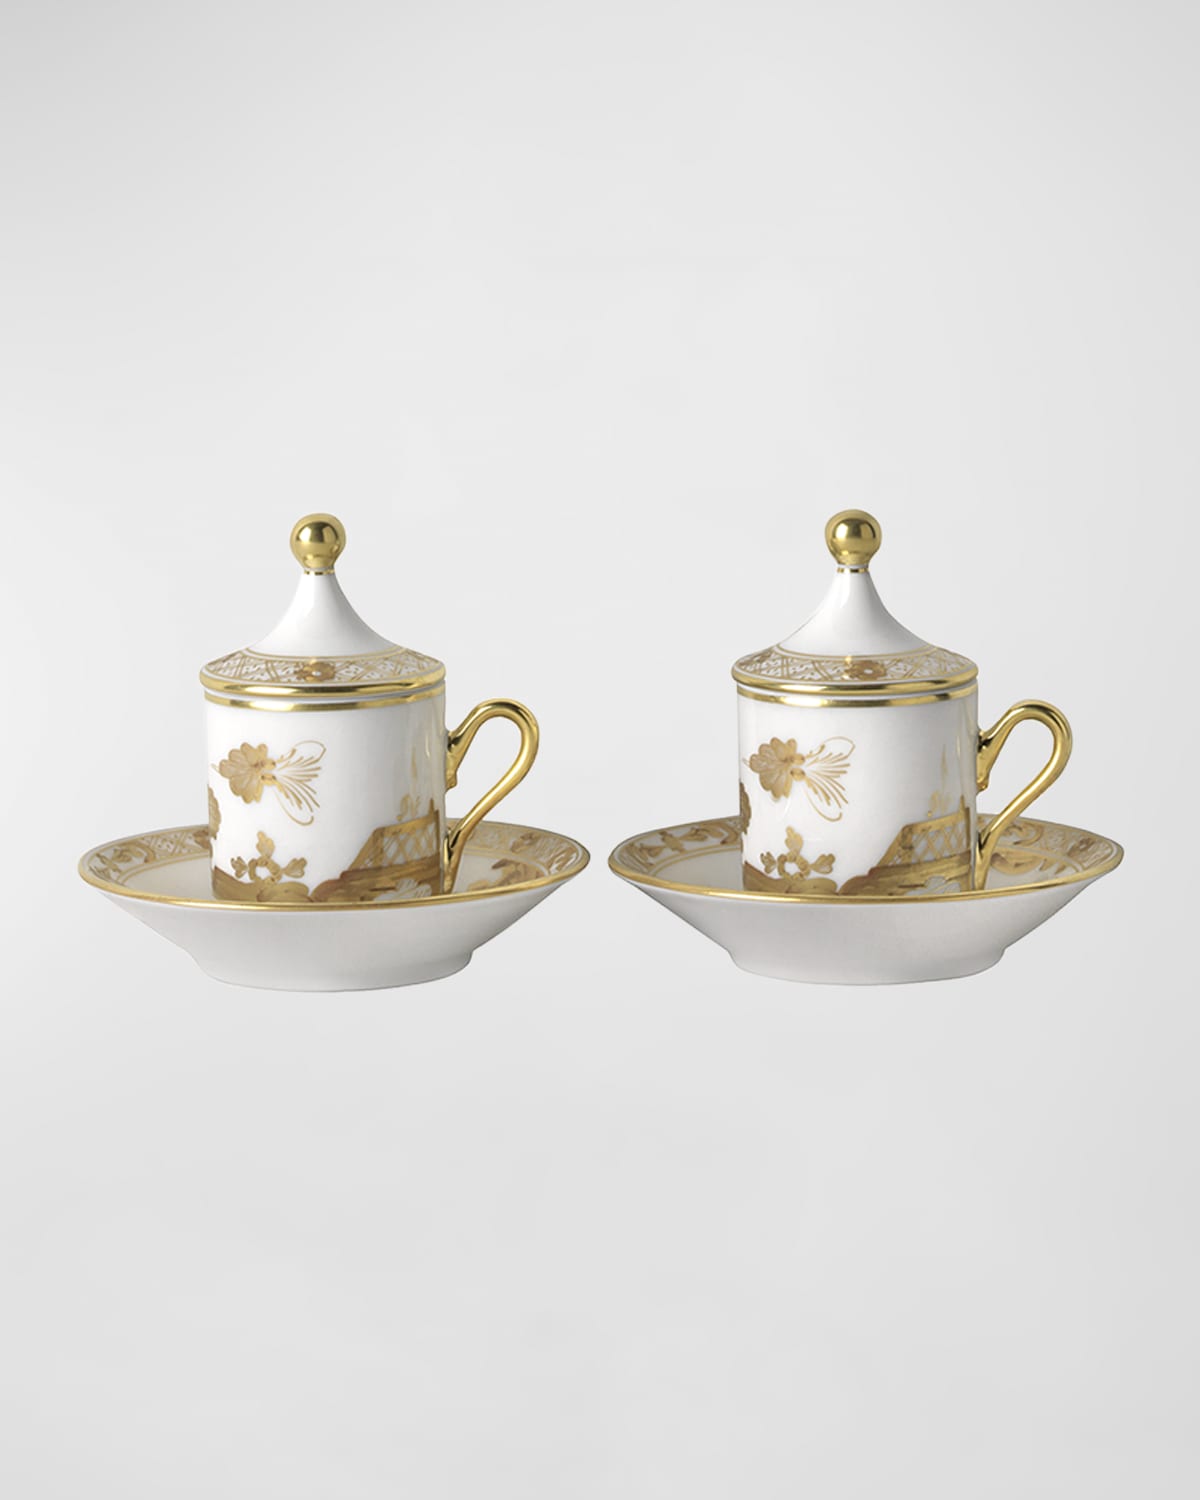 Ginori 1735 Coffe Cup With Plate And Cover, Set Of 2 In Oiaurum